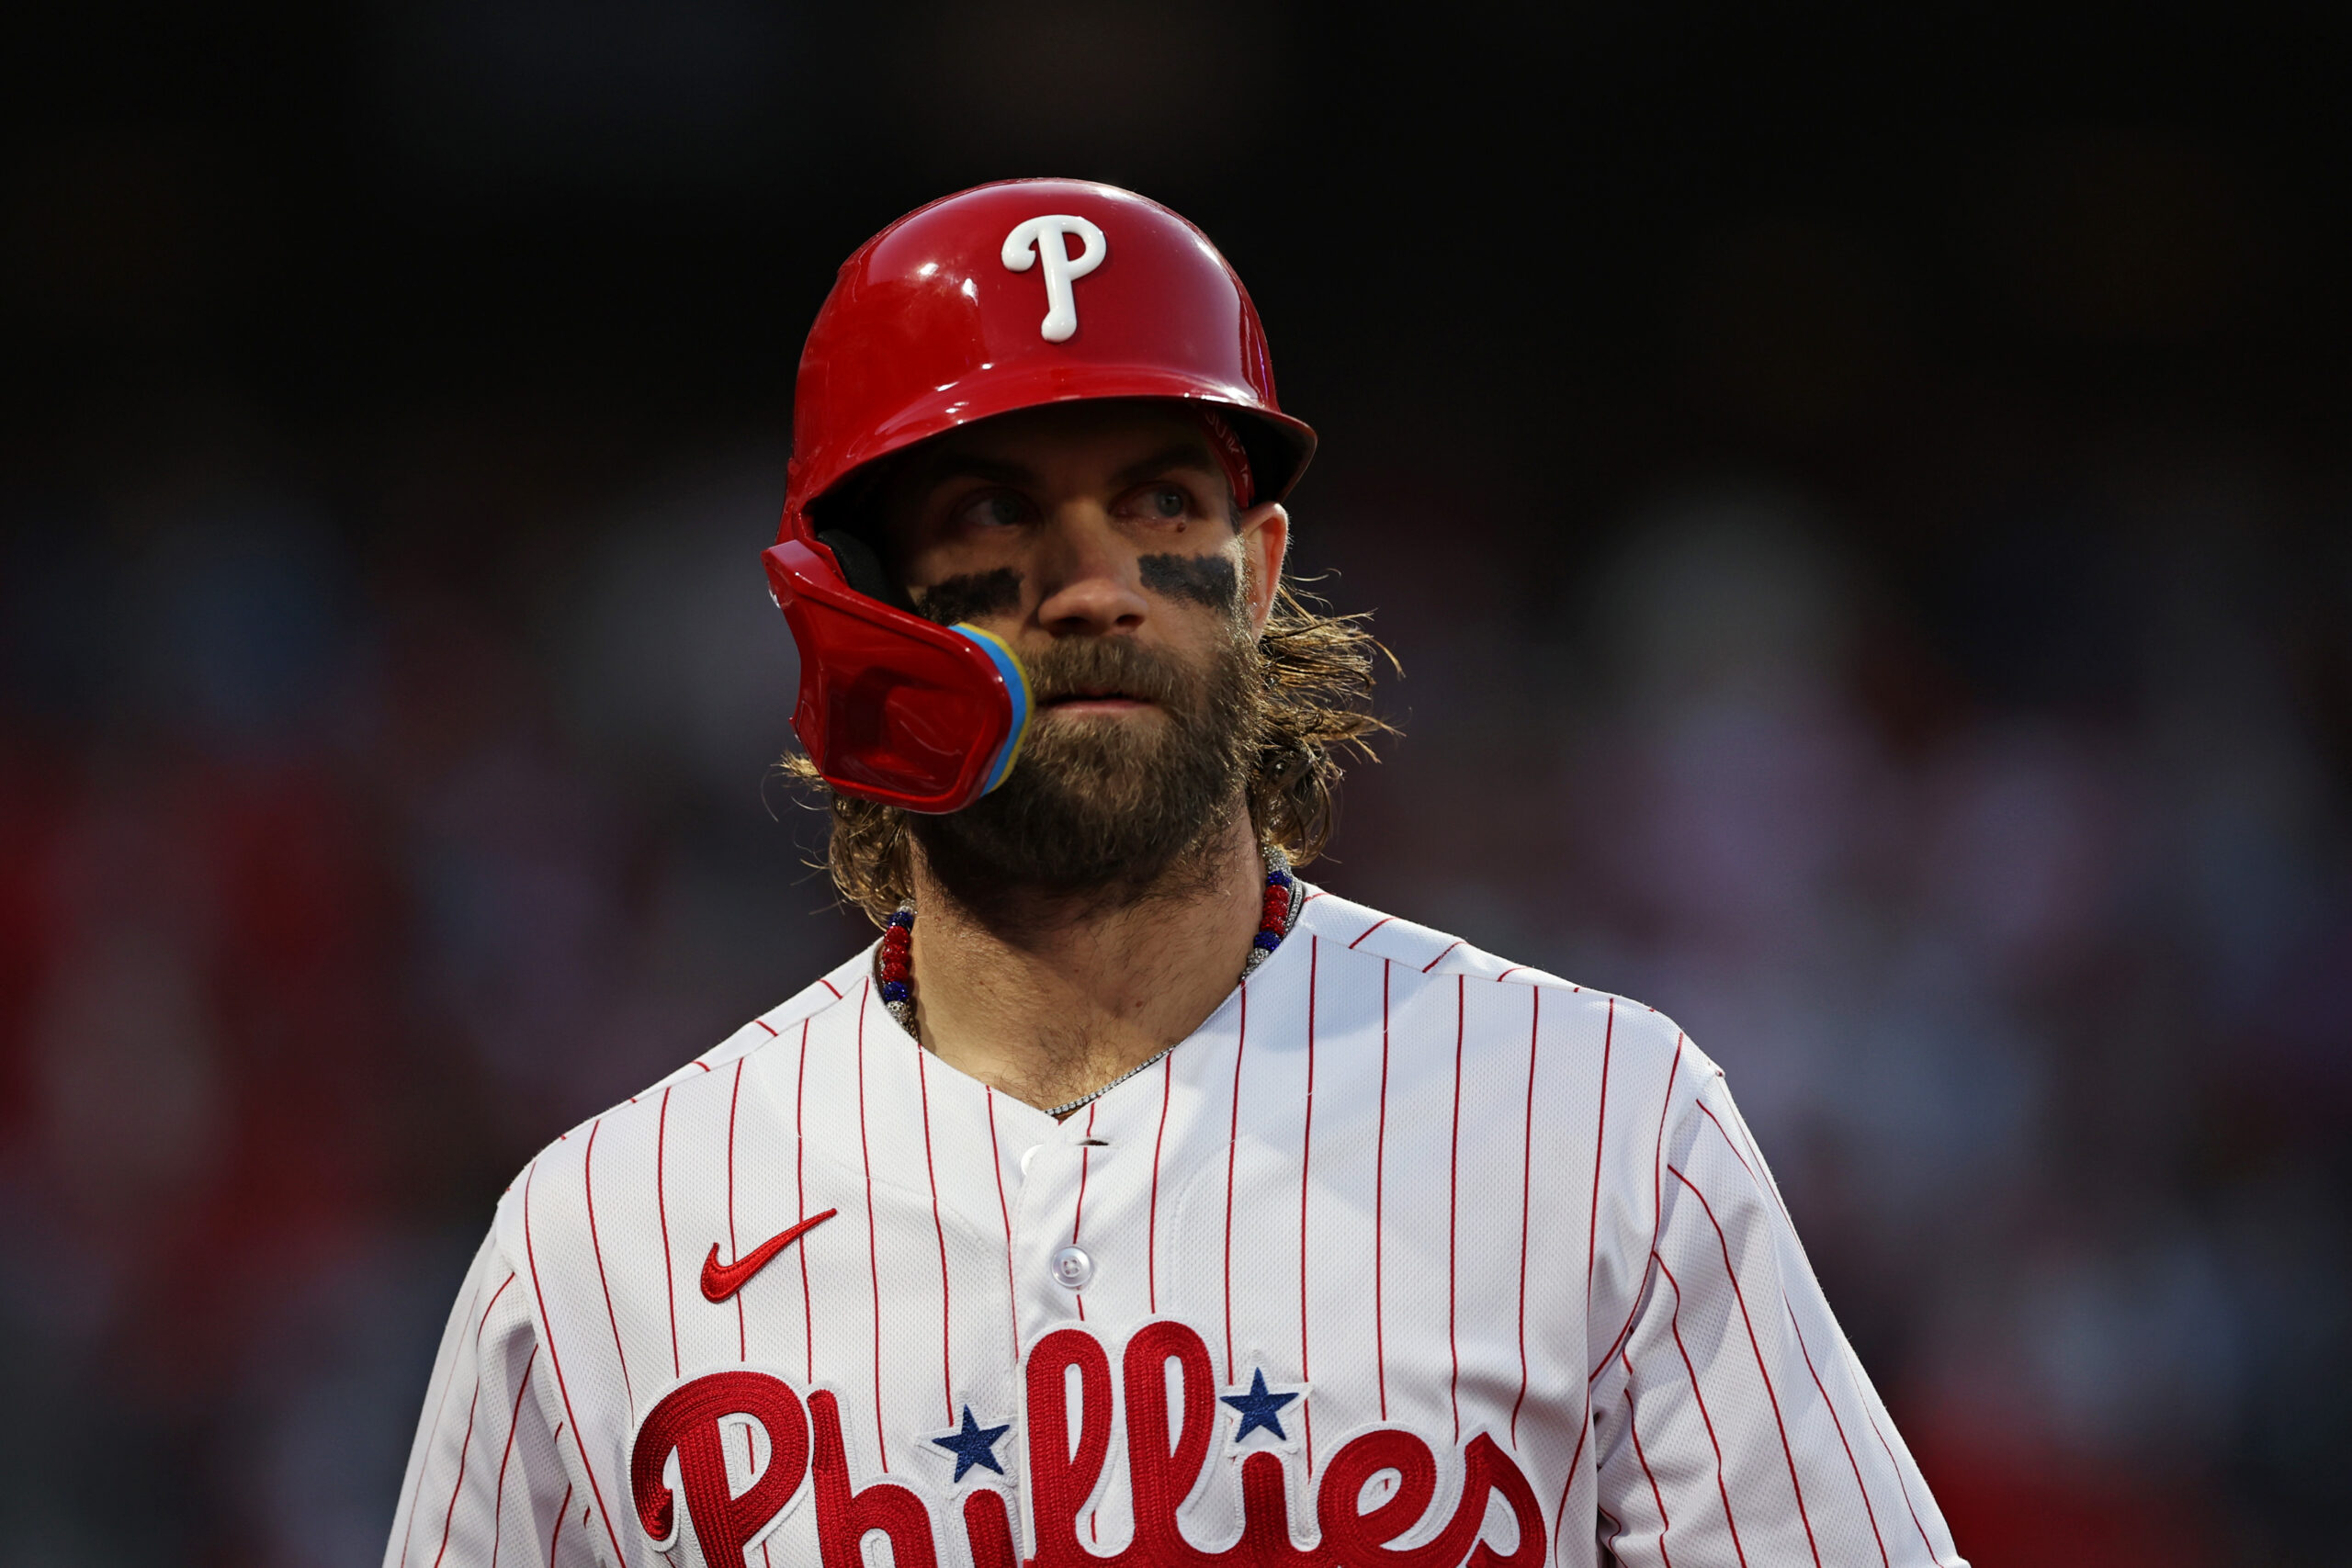 Phillies star Bryce Harper pulls up to Game 7 in Pat Bev Sixers uniform